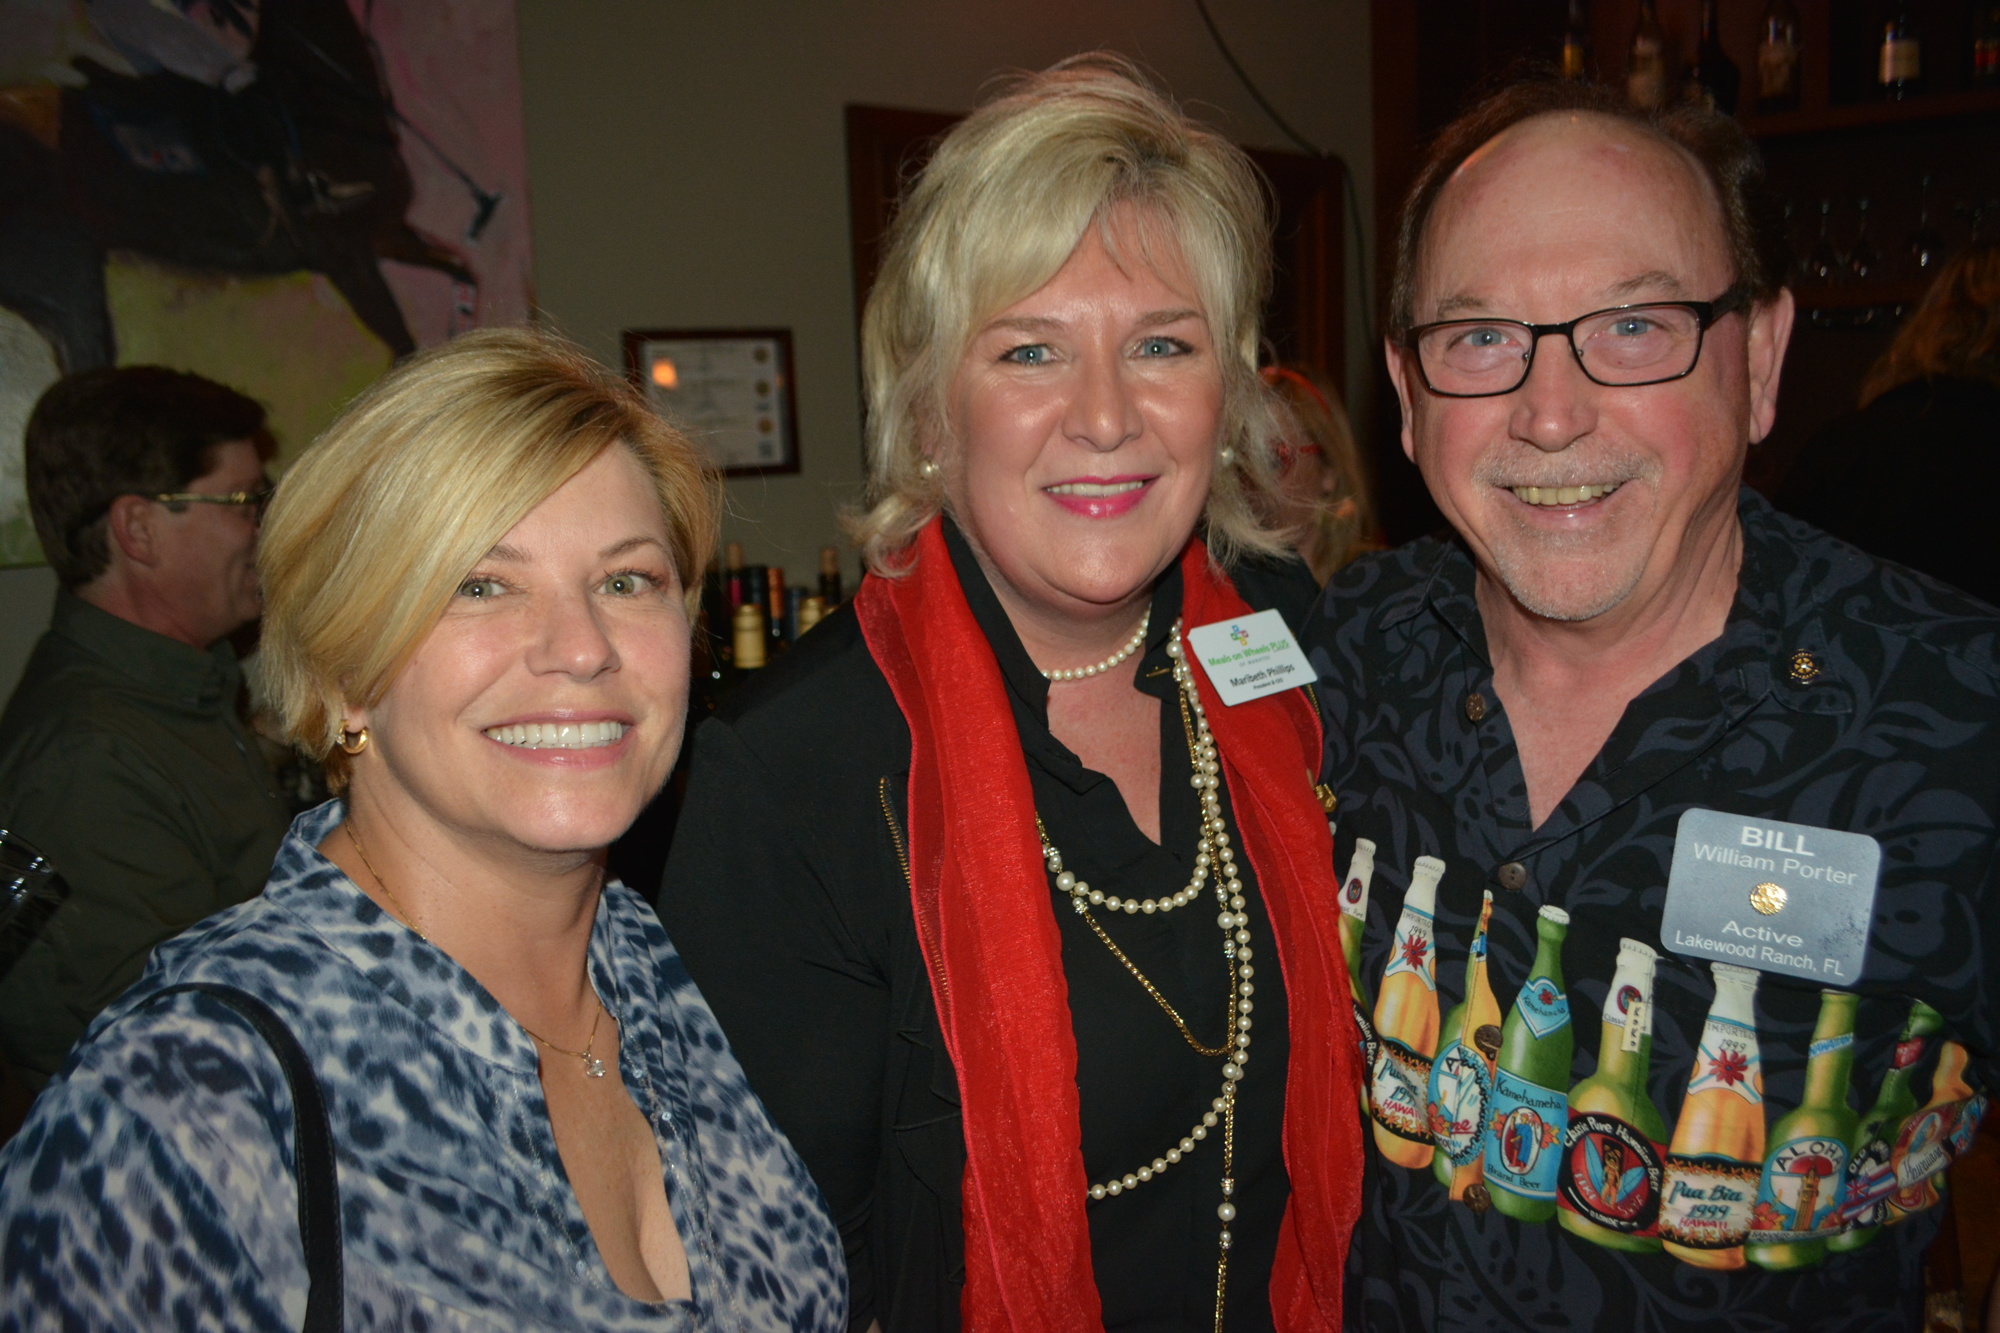 Lakewood Ranch's Angela Massaro-Fain joins Meals on Wheels Plus CEO Maribeth Phillips and celebrity bartender Bill Porter during 